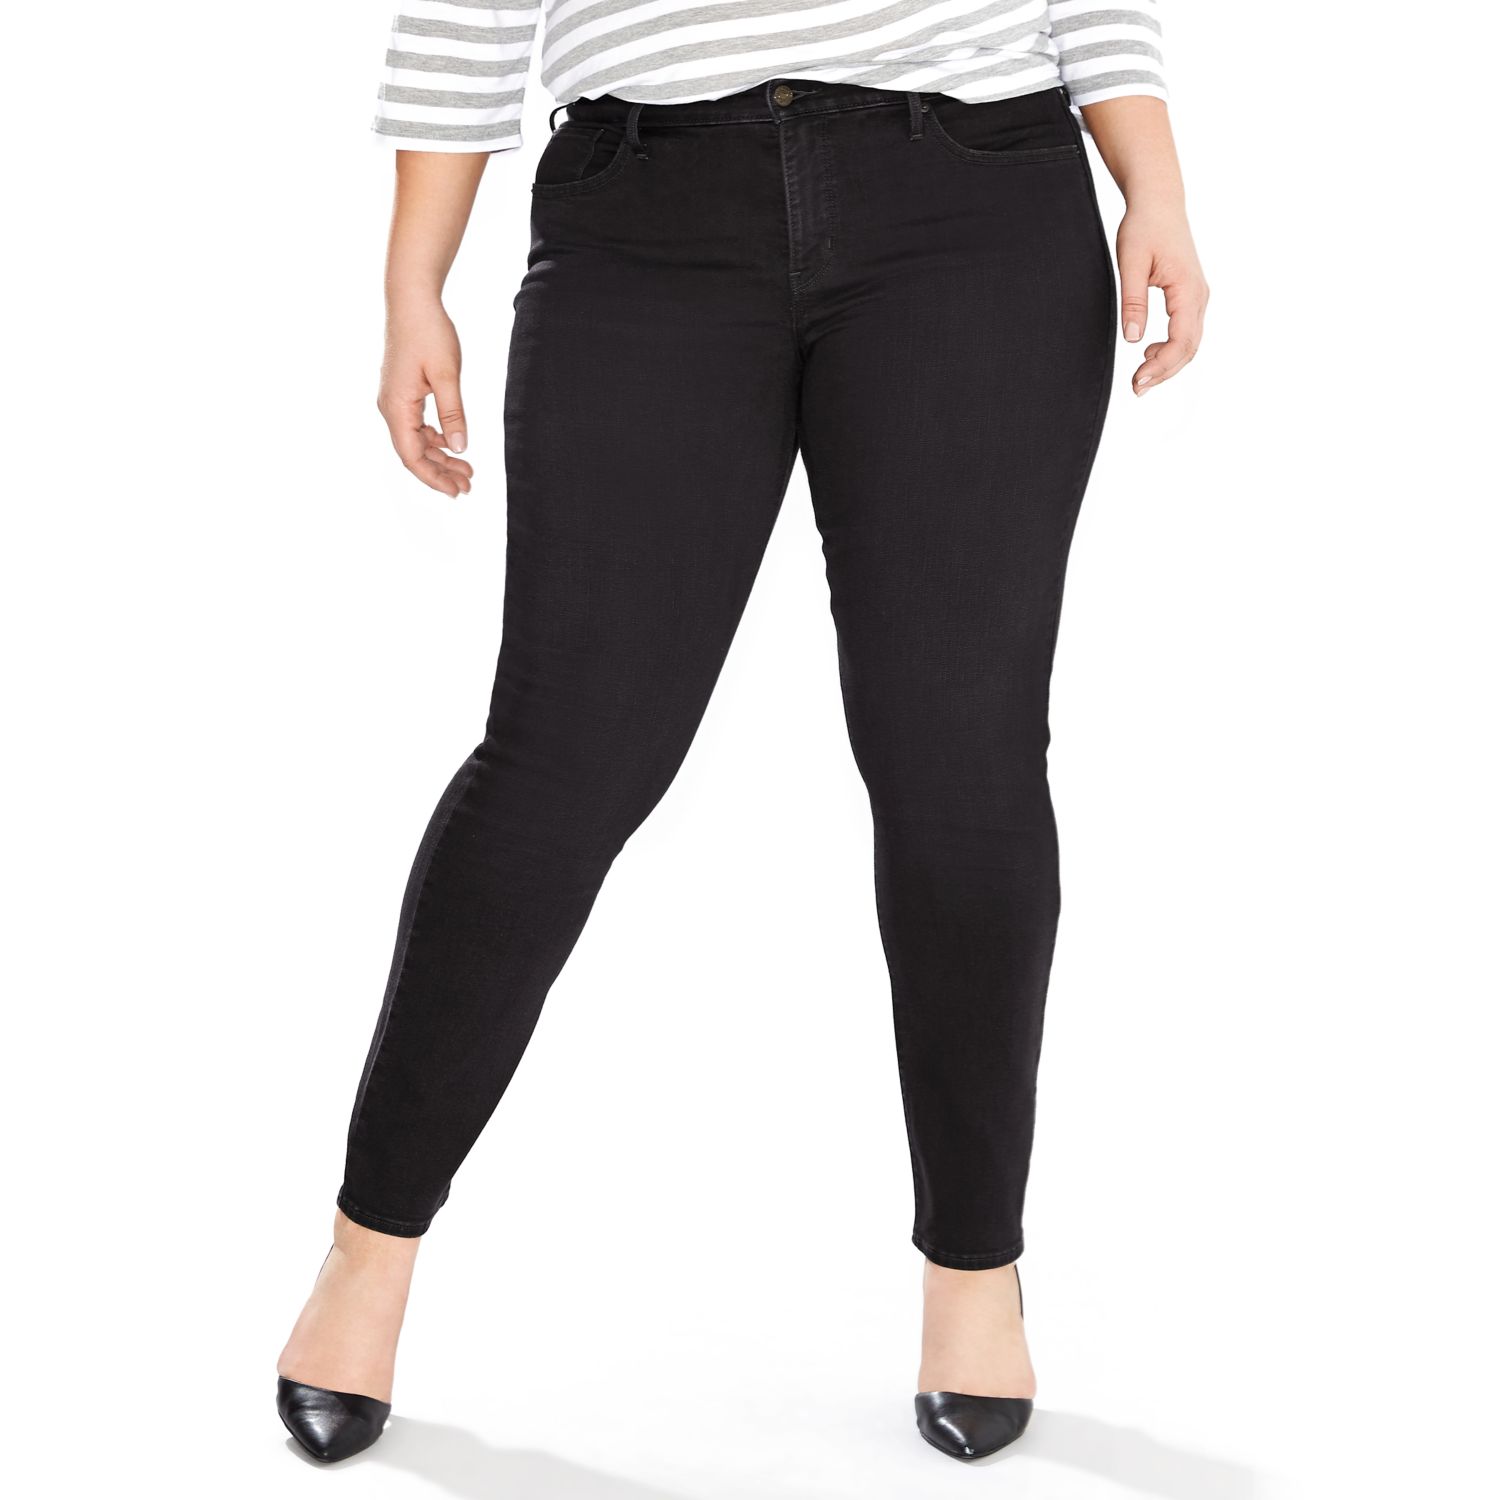 Image for Levi's Plus Size 311™ Shaping Skinny Jeans at Kohl's.